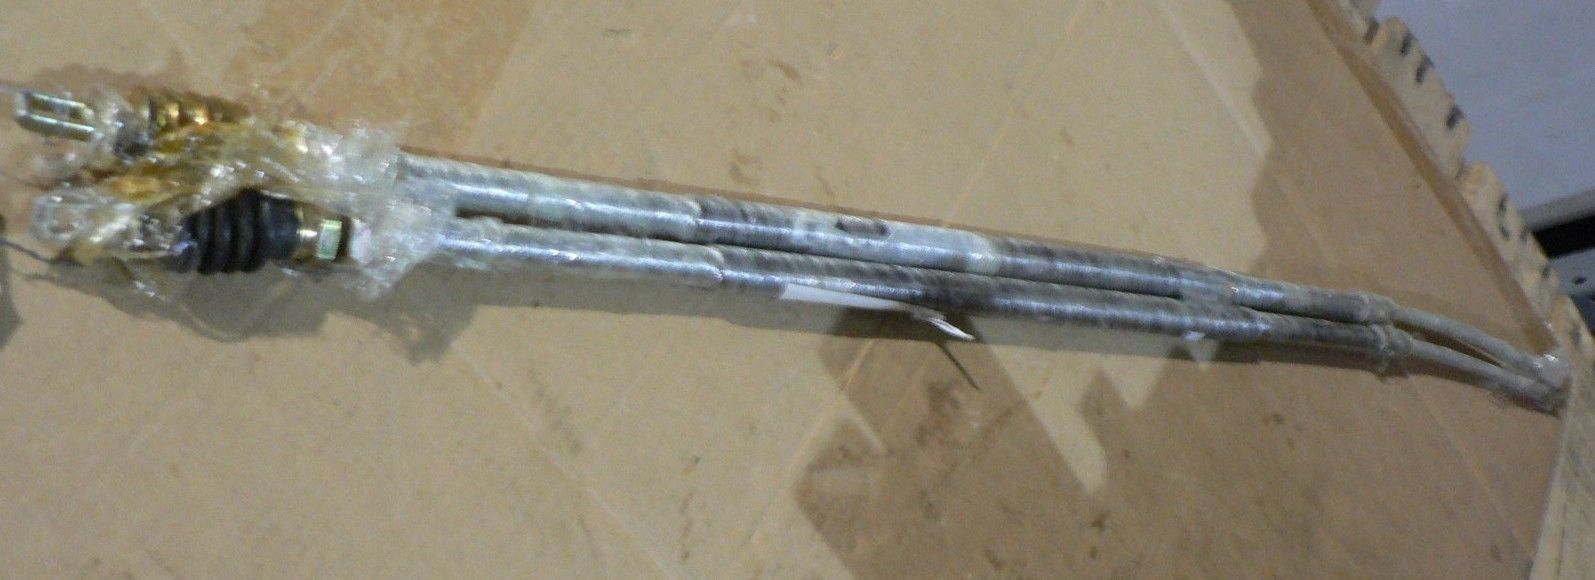 DAIMLER WIRE ROPE ASSEMBLY 416-420-05-85